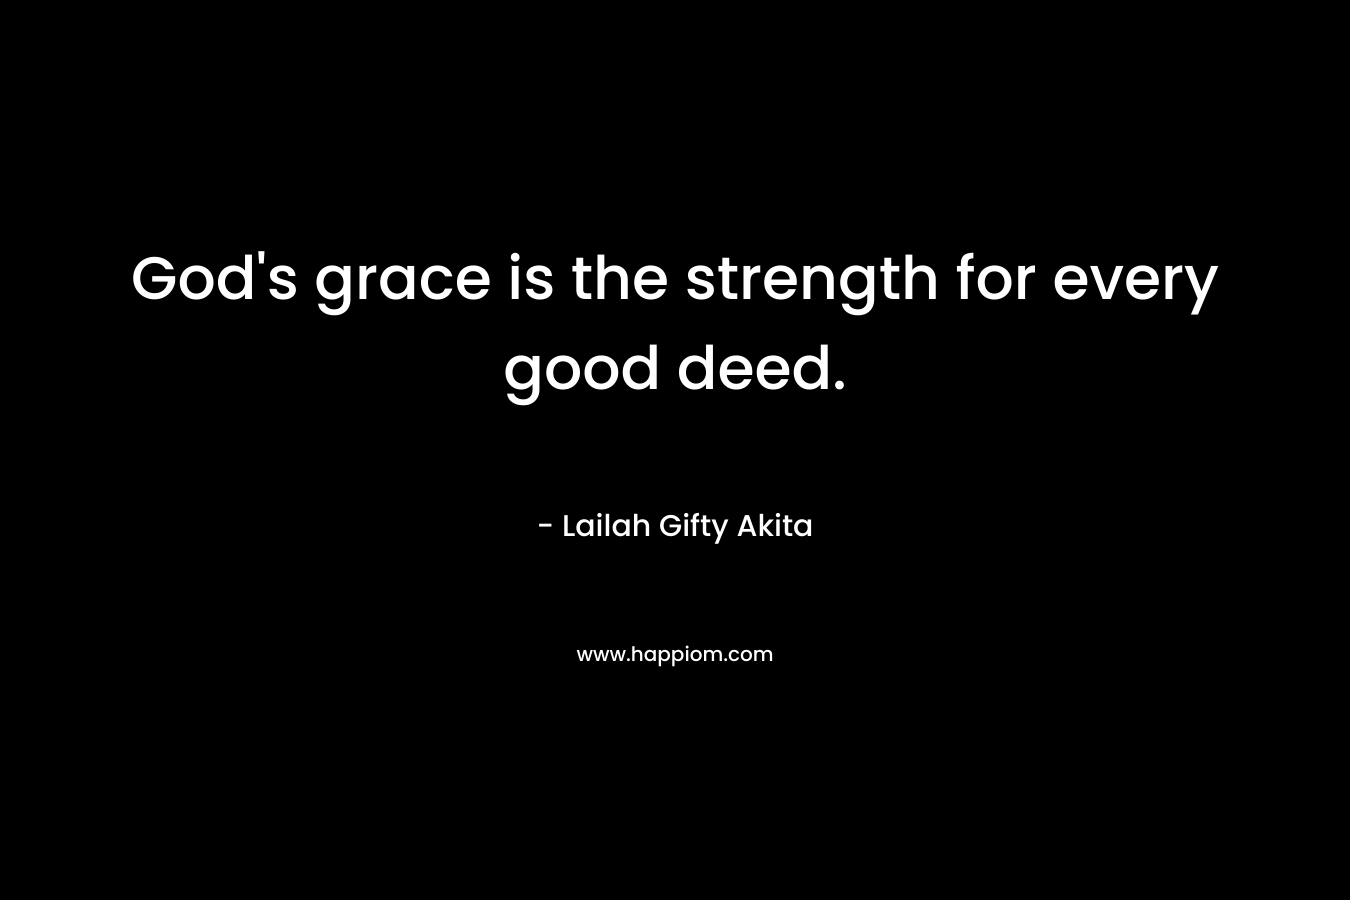 God's grace is the strength for every good deed.